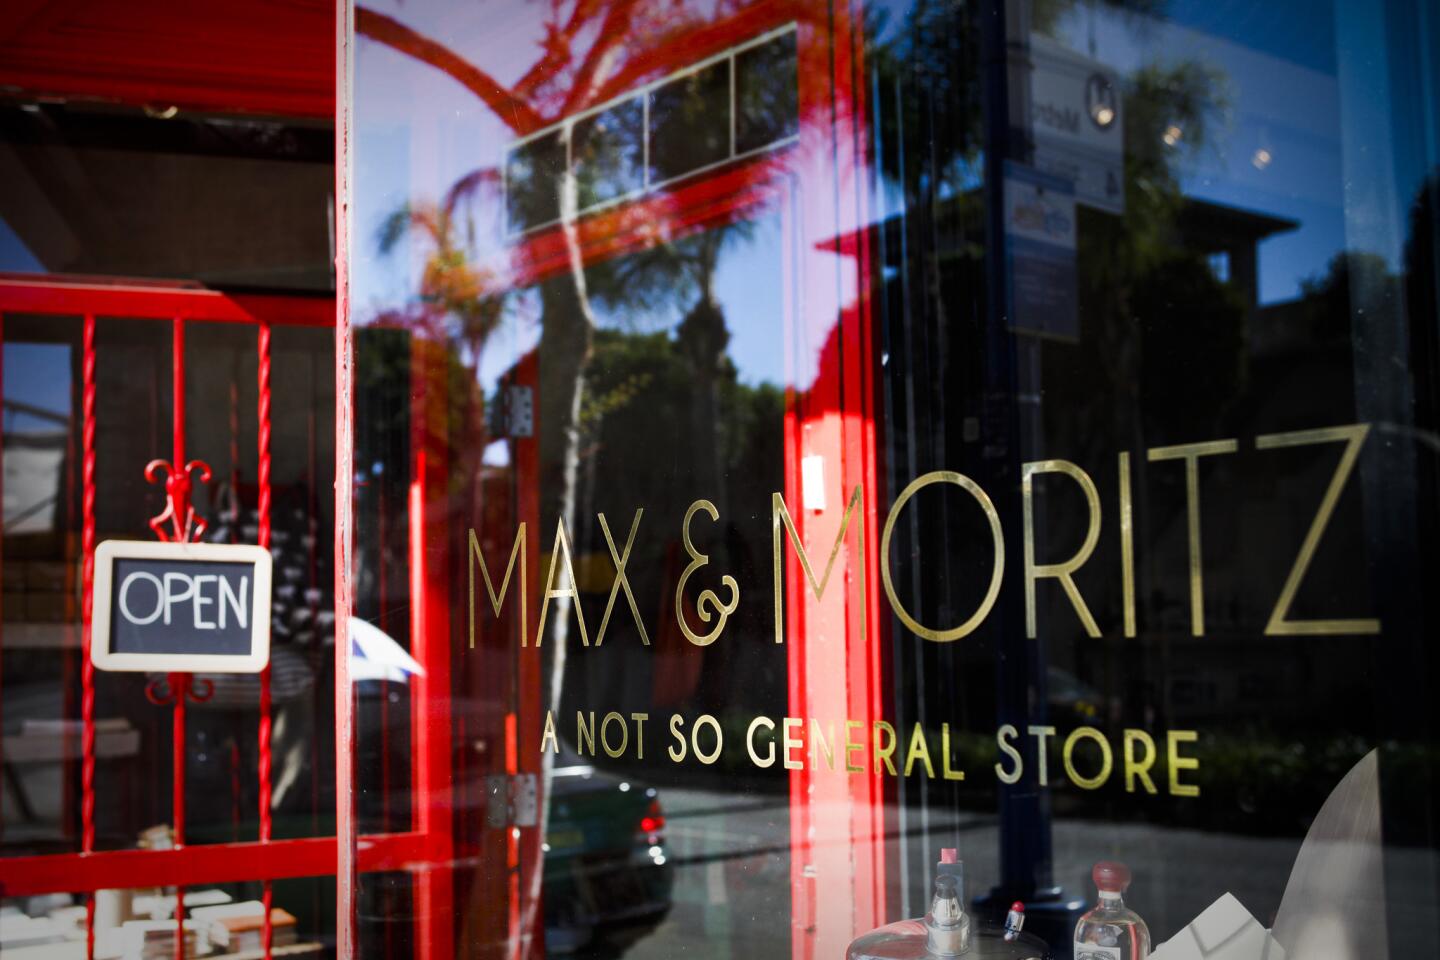 Nino Mier and his mother, Esther Linsmayer, recently opened Max & Mortiz a few doors down from their Foodlab cafe on Santa Monica Boulevard. The new store is an eclectic mix of new housewares and antiques.